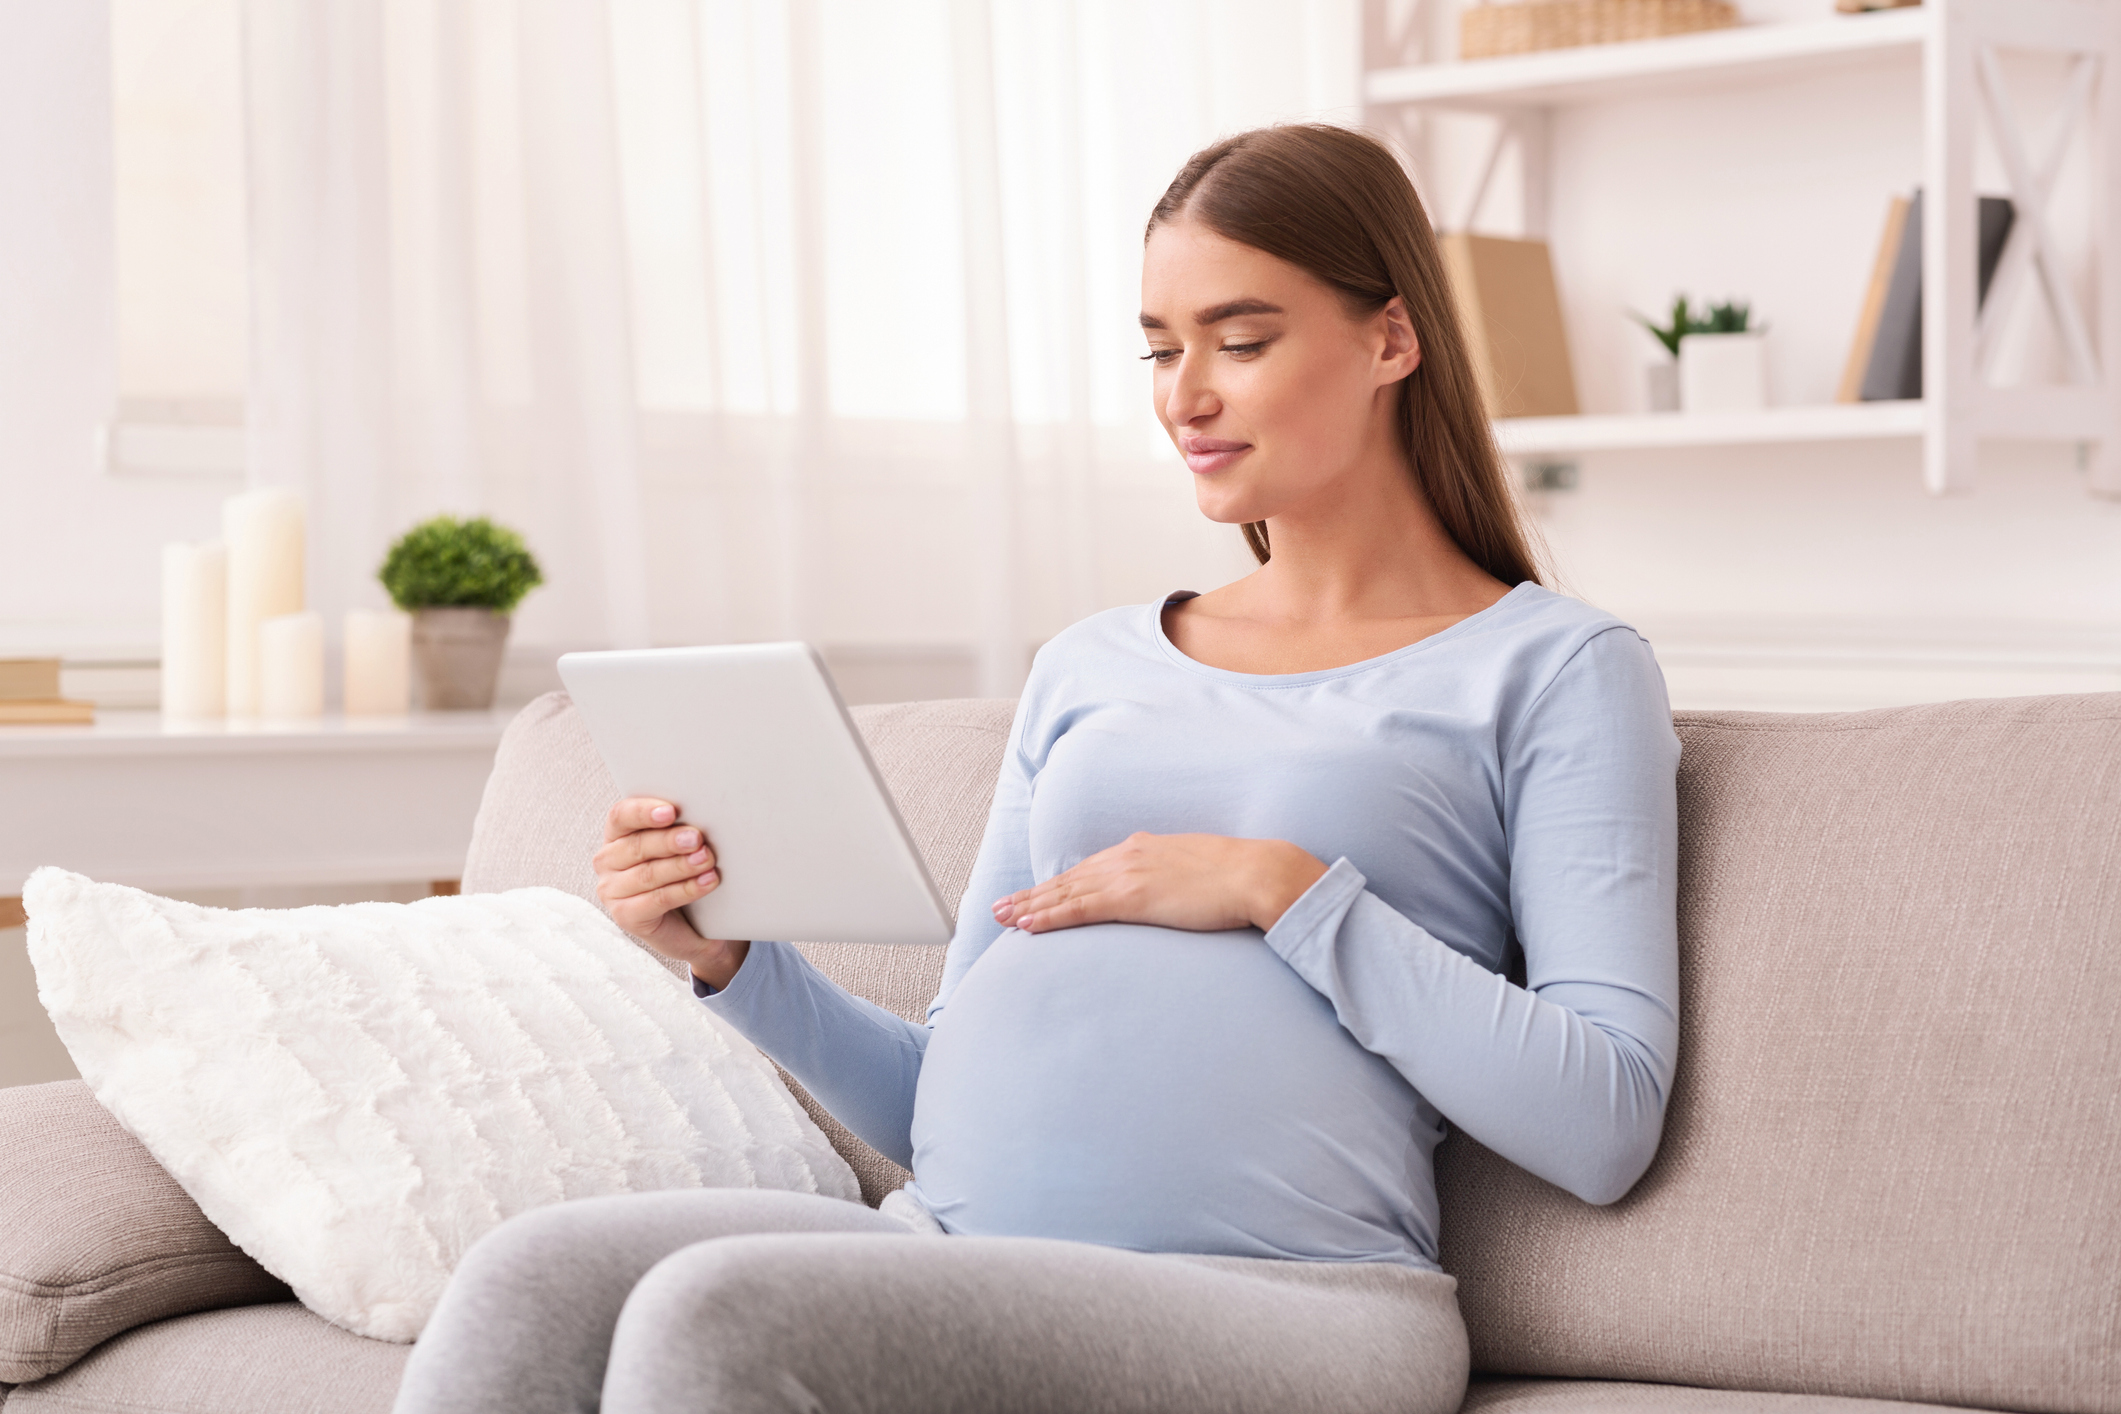 A pregnant woman uses a tablet computer